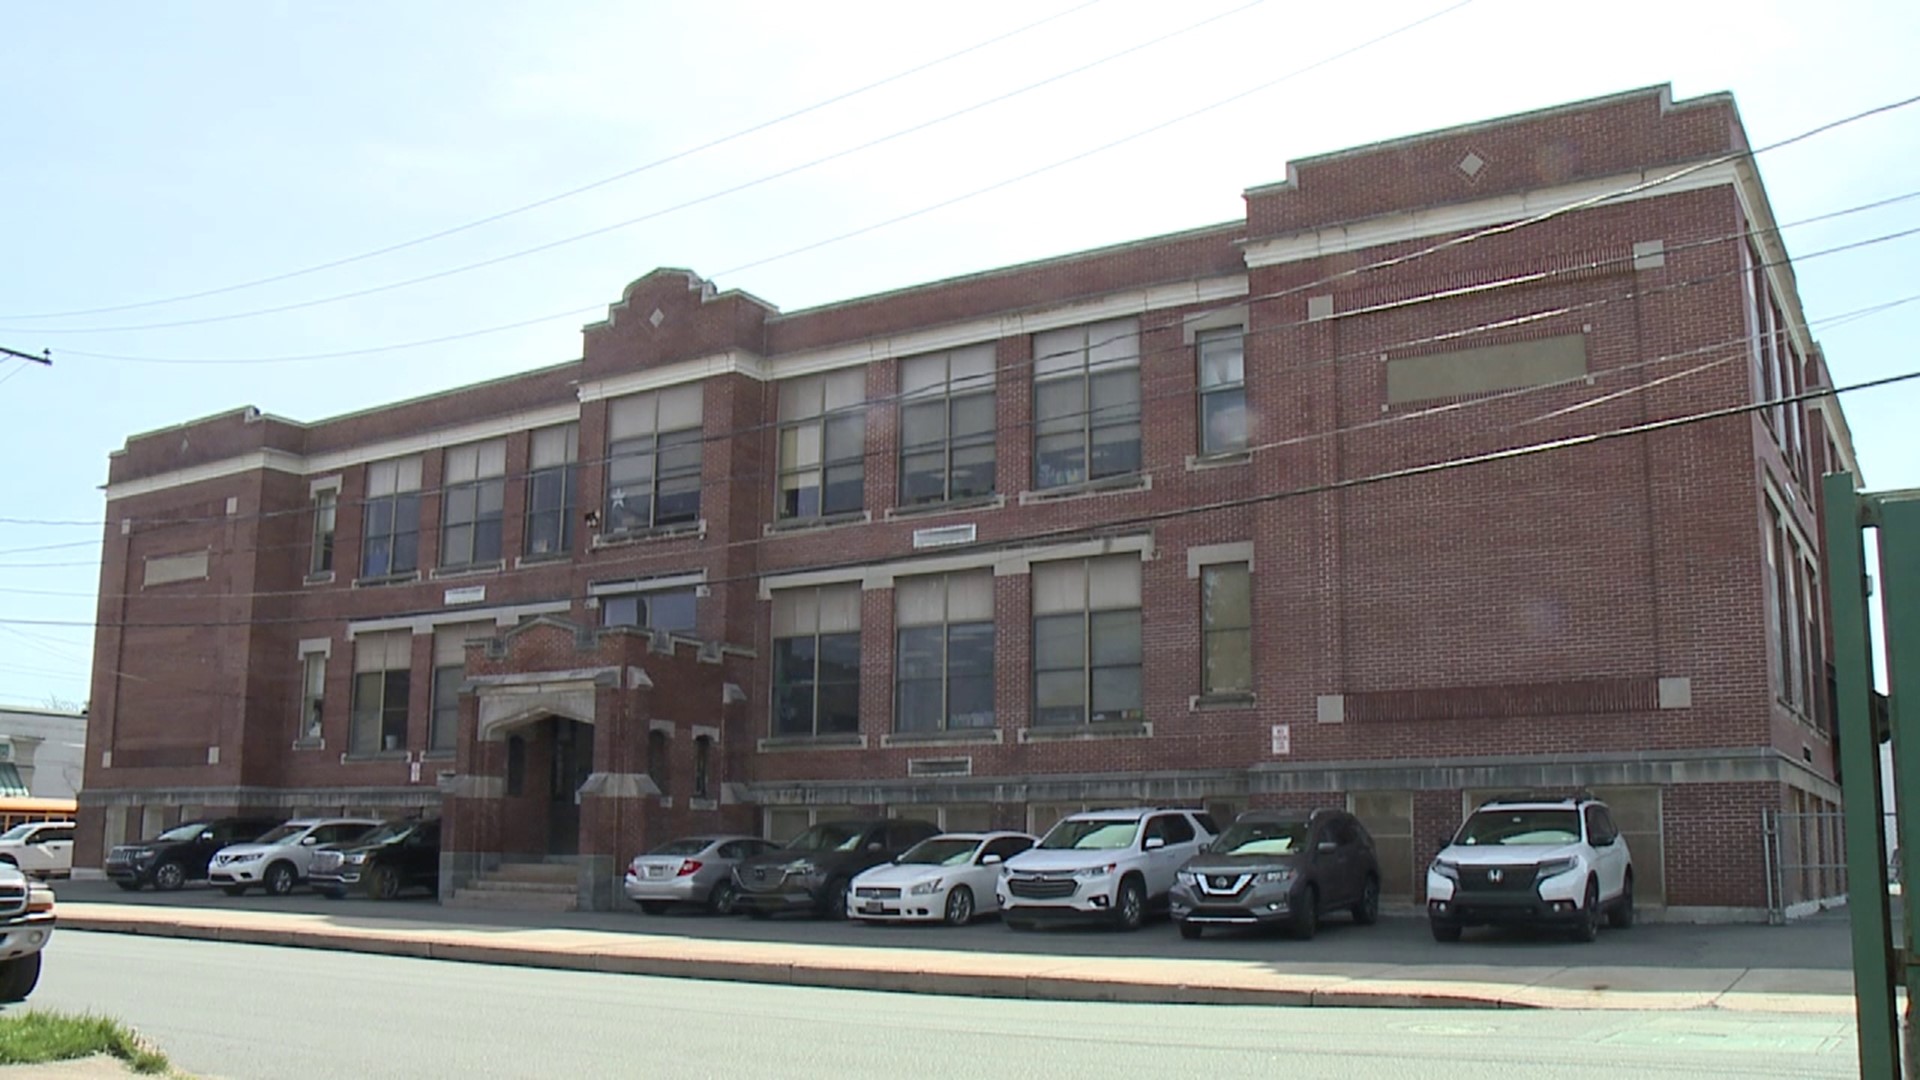 As the end of this school year approaches, some parents in Luzerne County are worried their kids may end up at a different school in the fall.